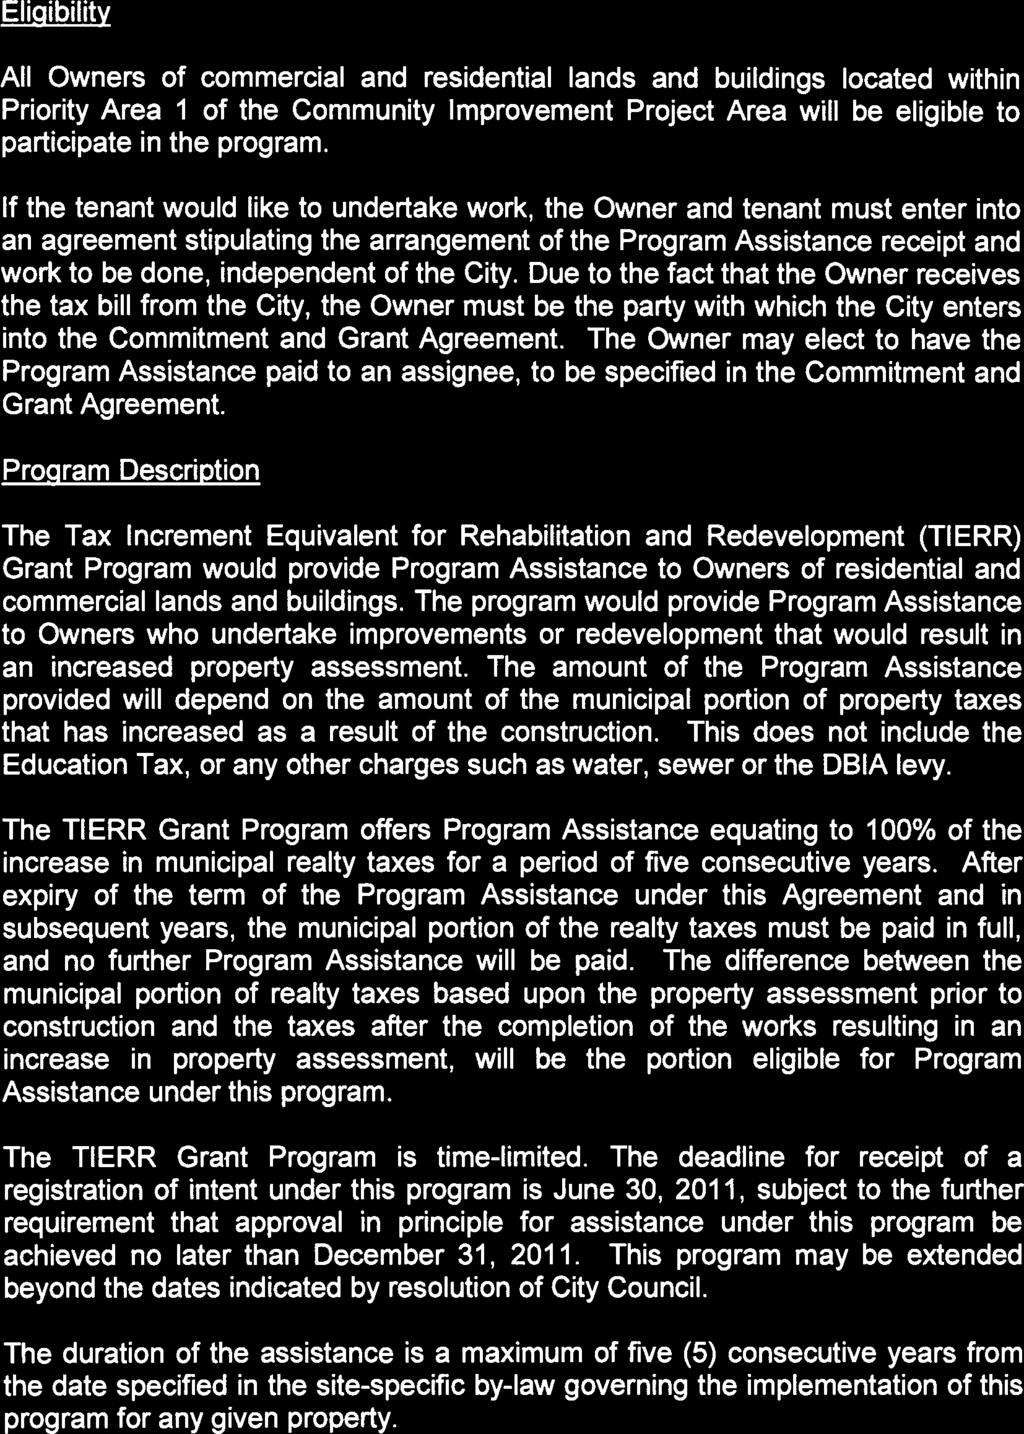 TAX INCREMENT FOR REHABILITATION AND REDEVELOPMENT PROGRAM AGREEMENT Page 6 Eligibility All Owners of commercial and residential lands and buildings located within Priority Area 1 of the Community